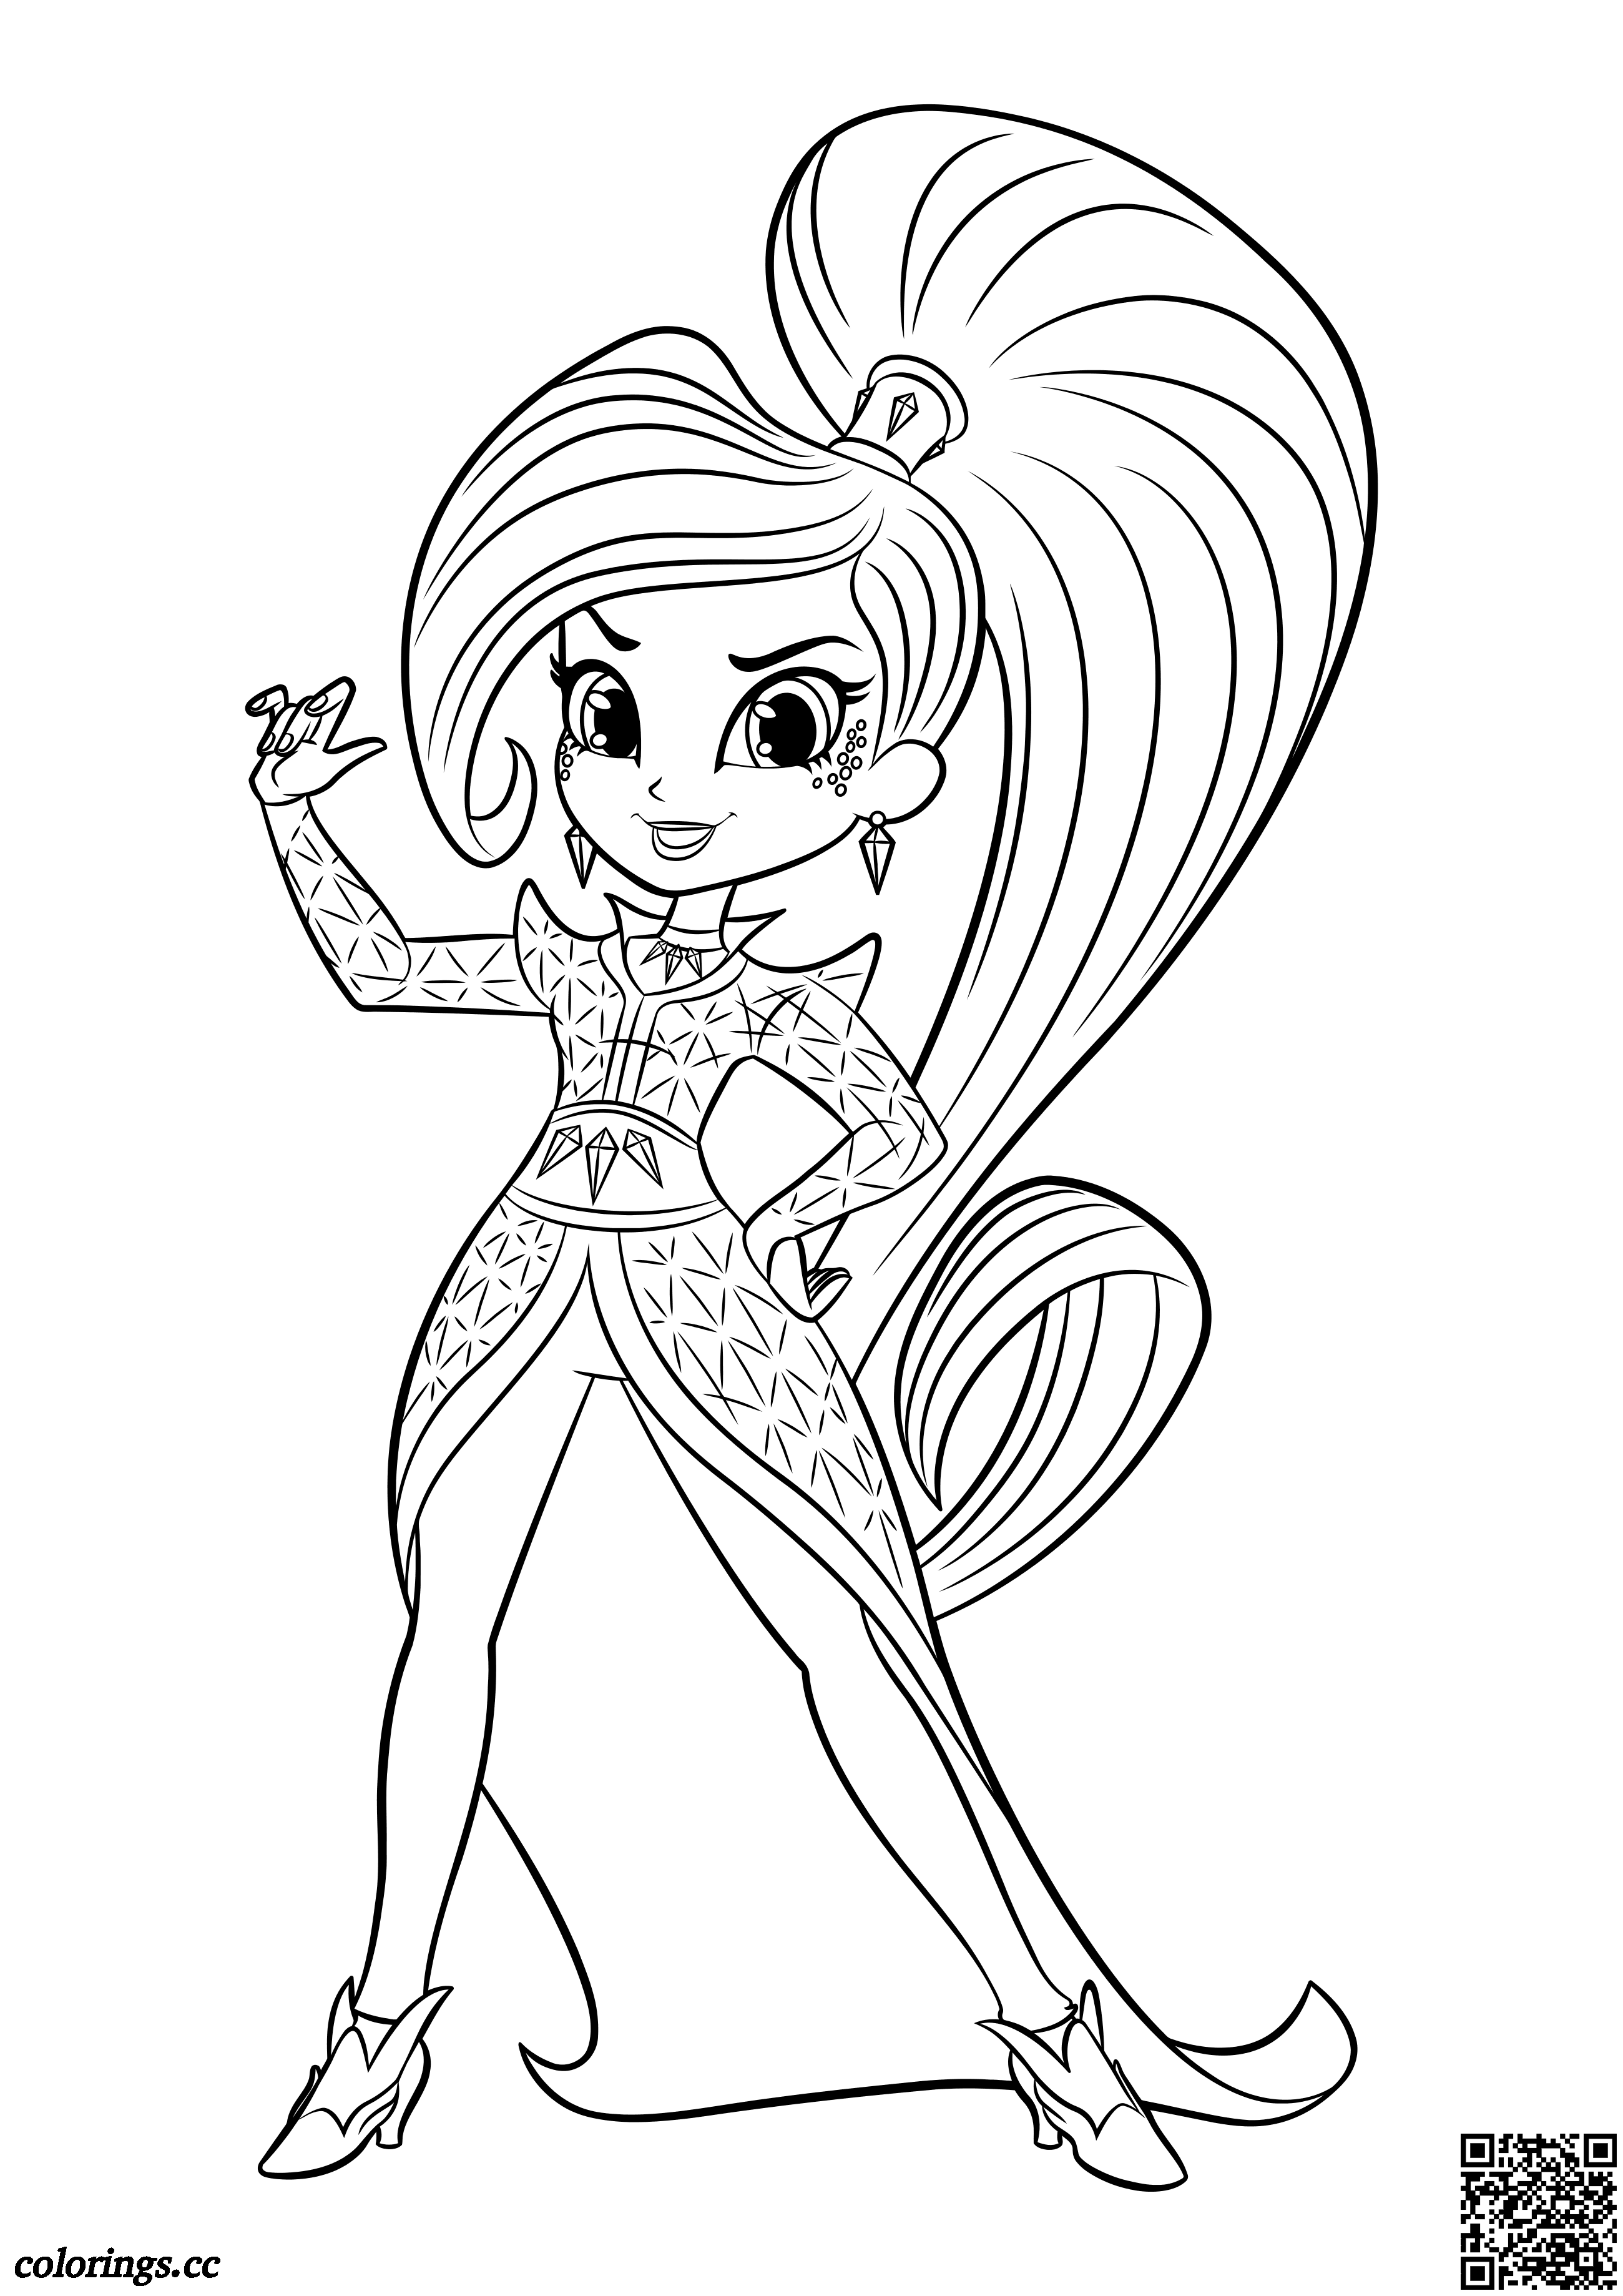 Zeta the Sorceress coloring pages, Shimmer and Shine coloring ...